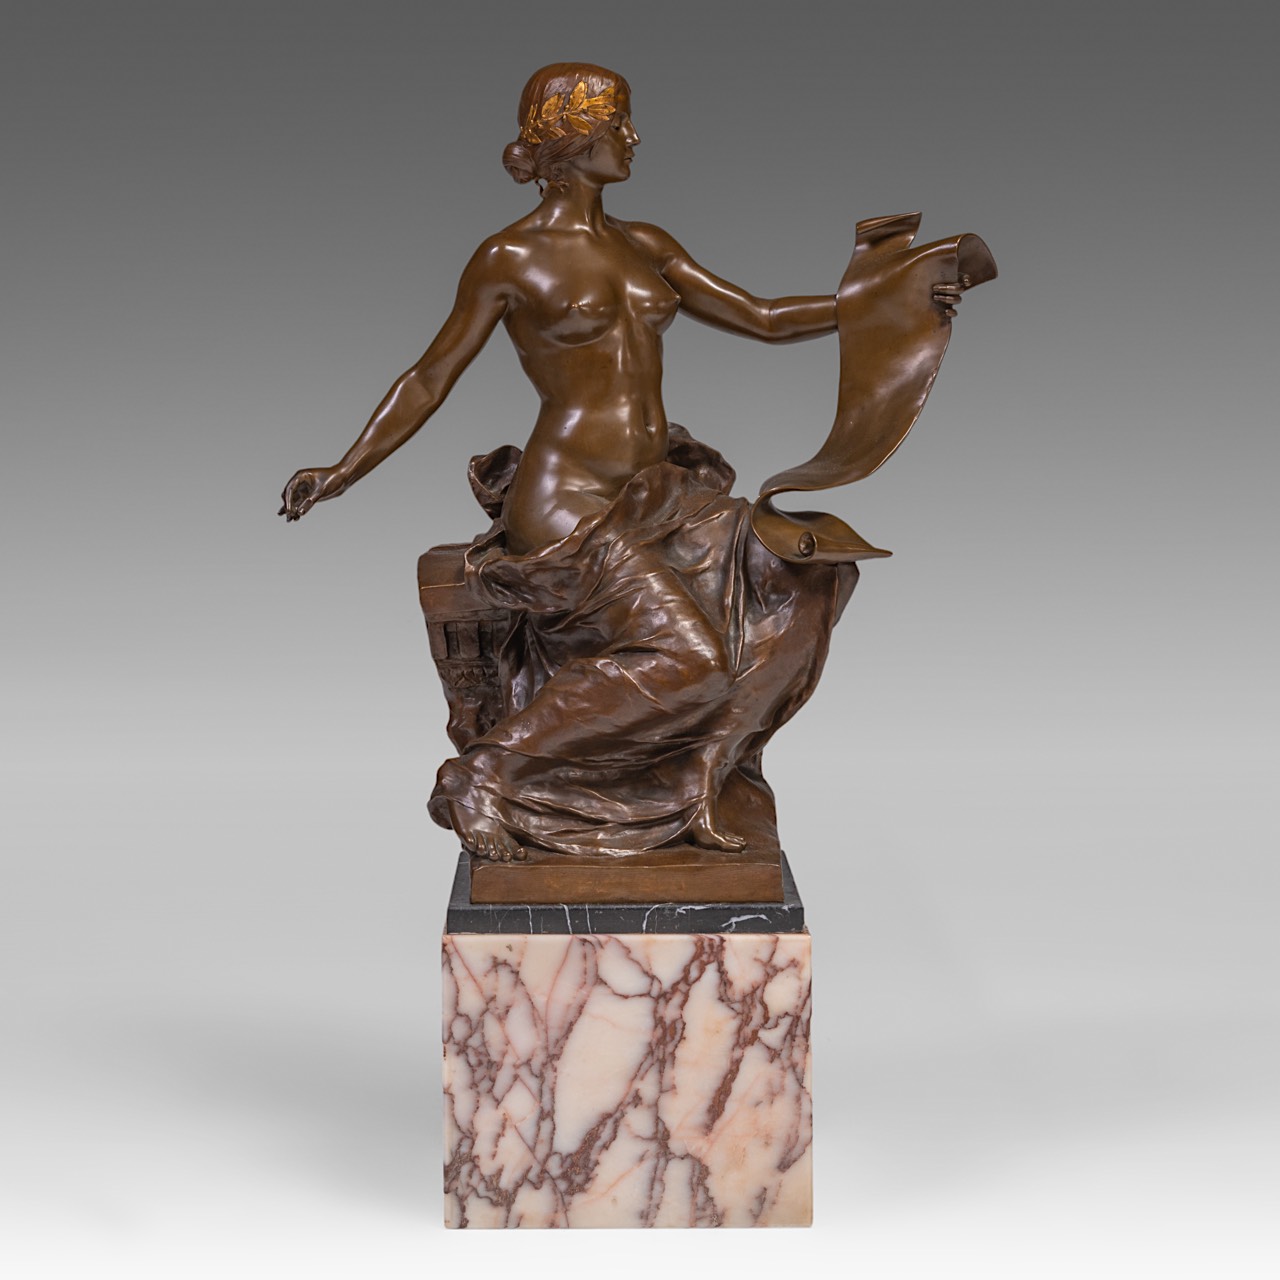 Georges Bareau (1866-1931), 'Allegory of History', patined and gilt bronze, casted by Barbedienne, H